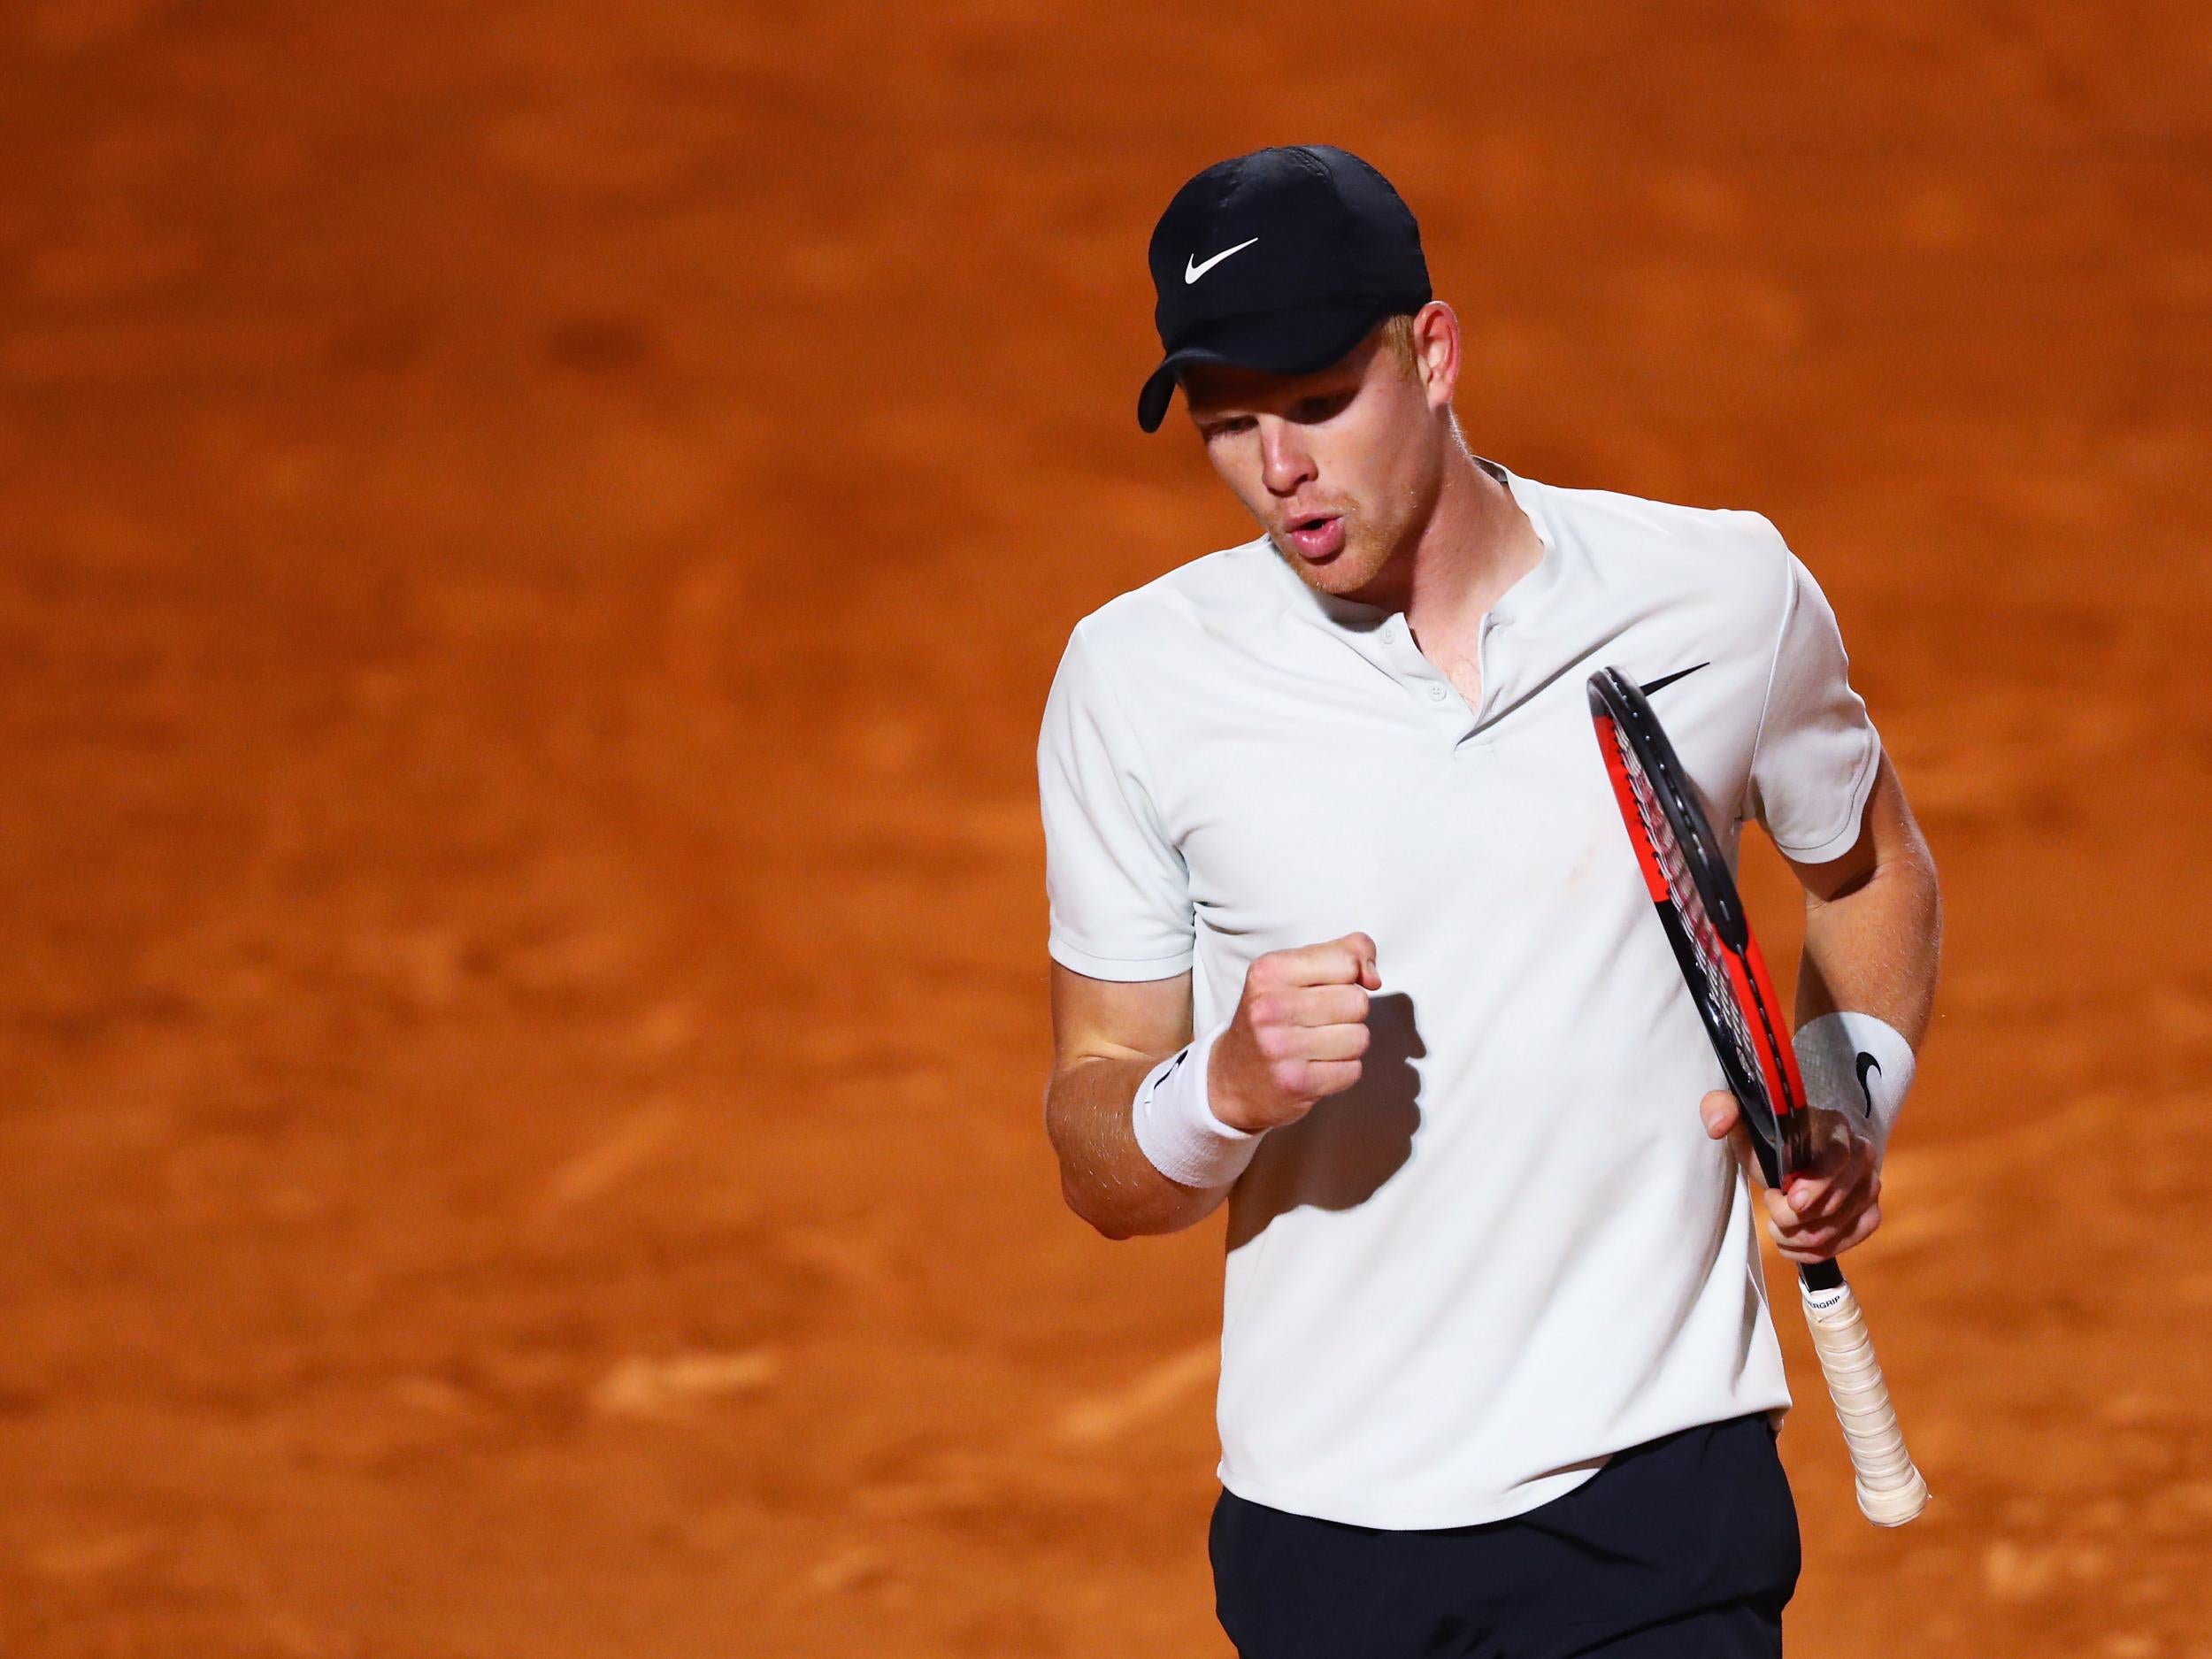 McEnroe expected Edmund to push on more than he has